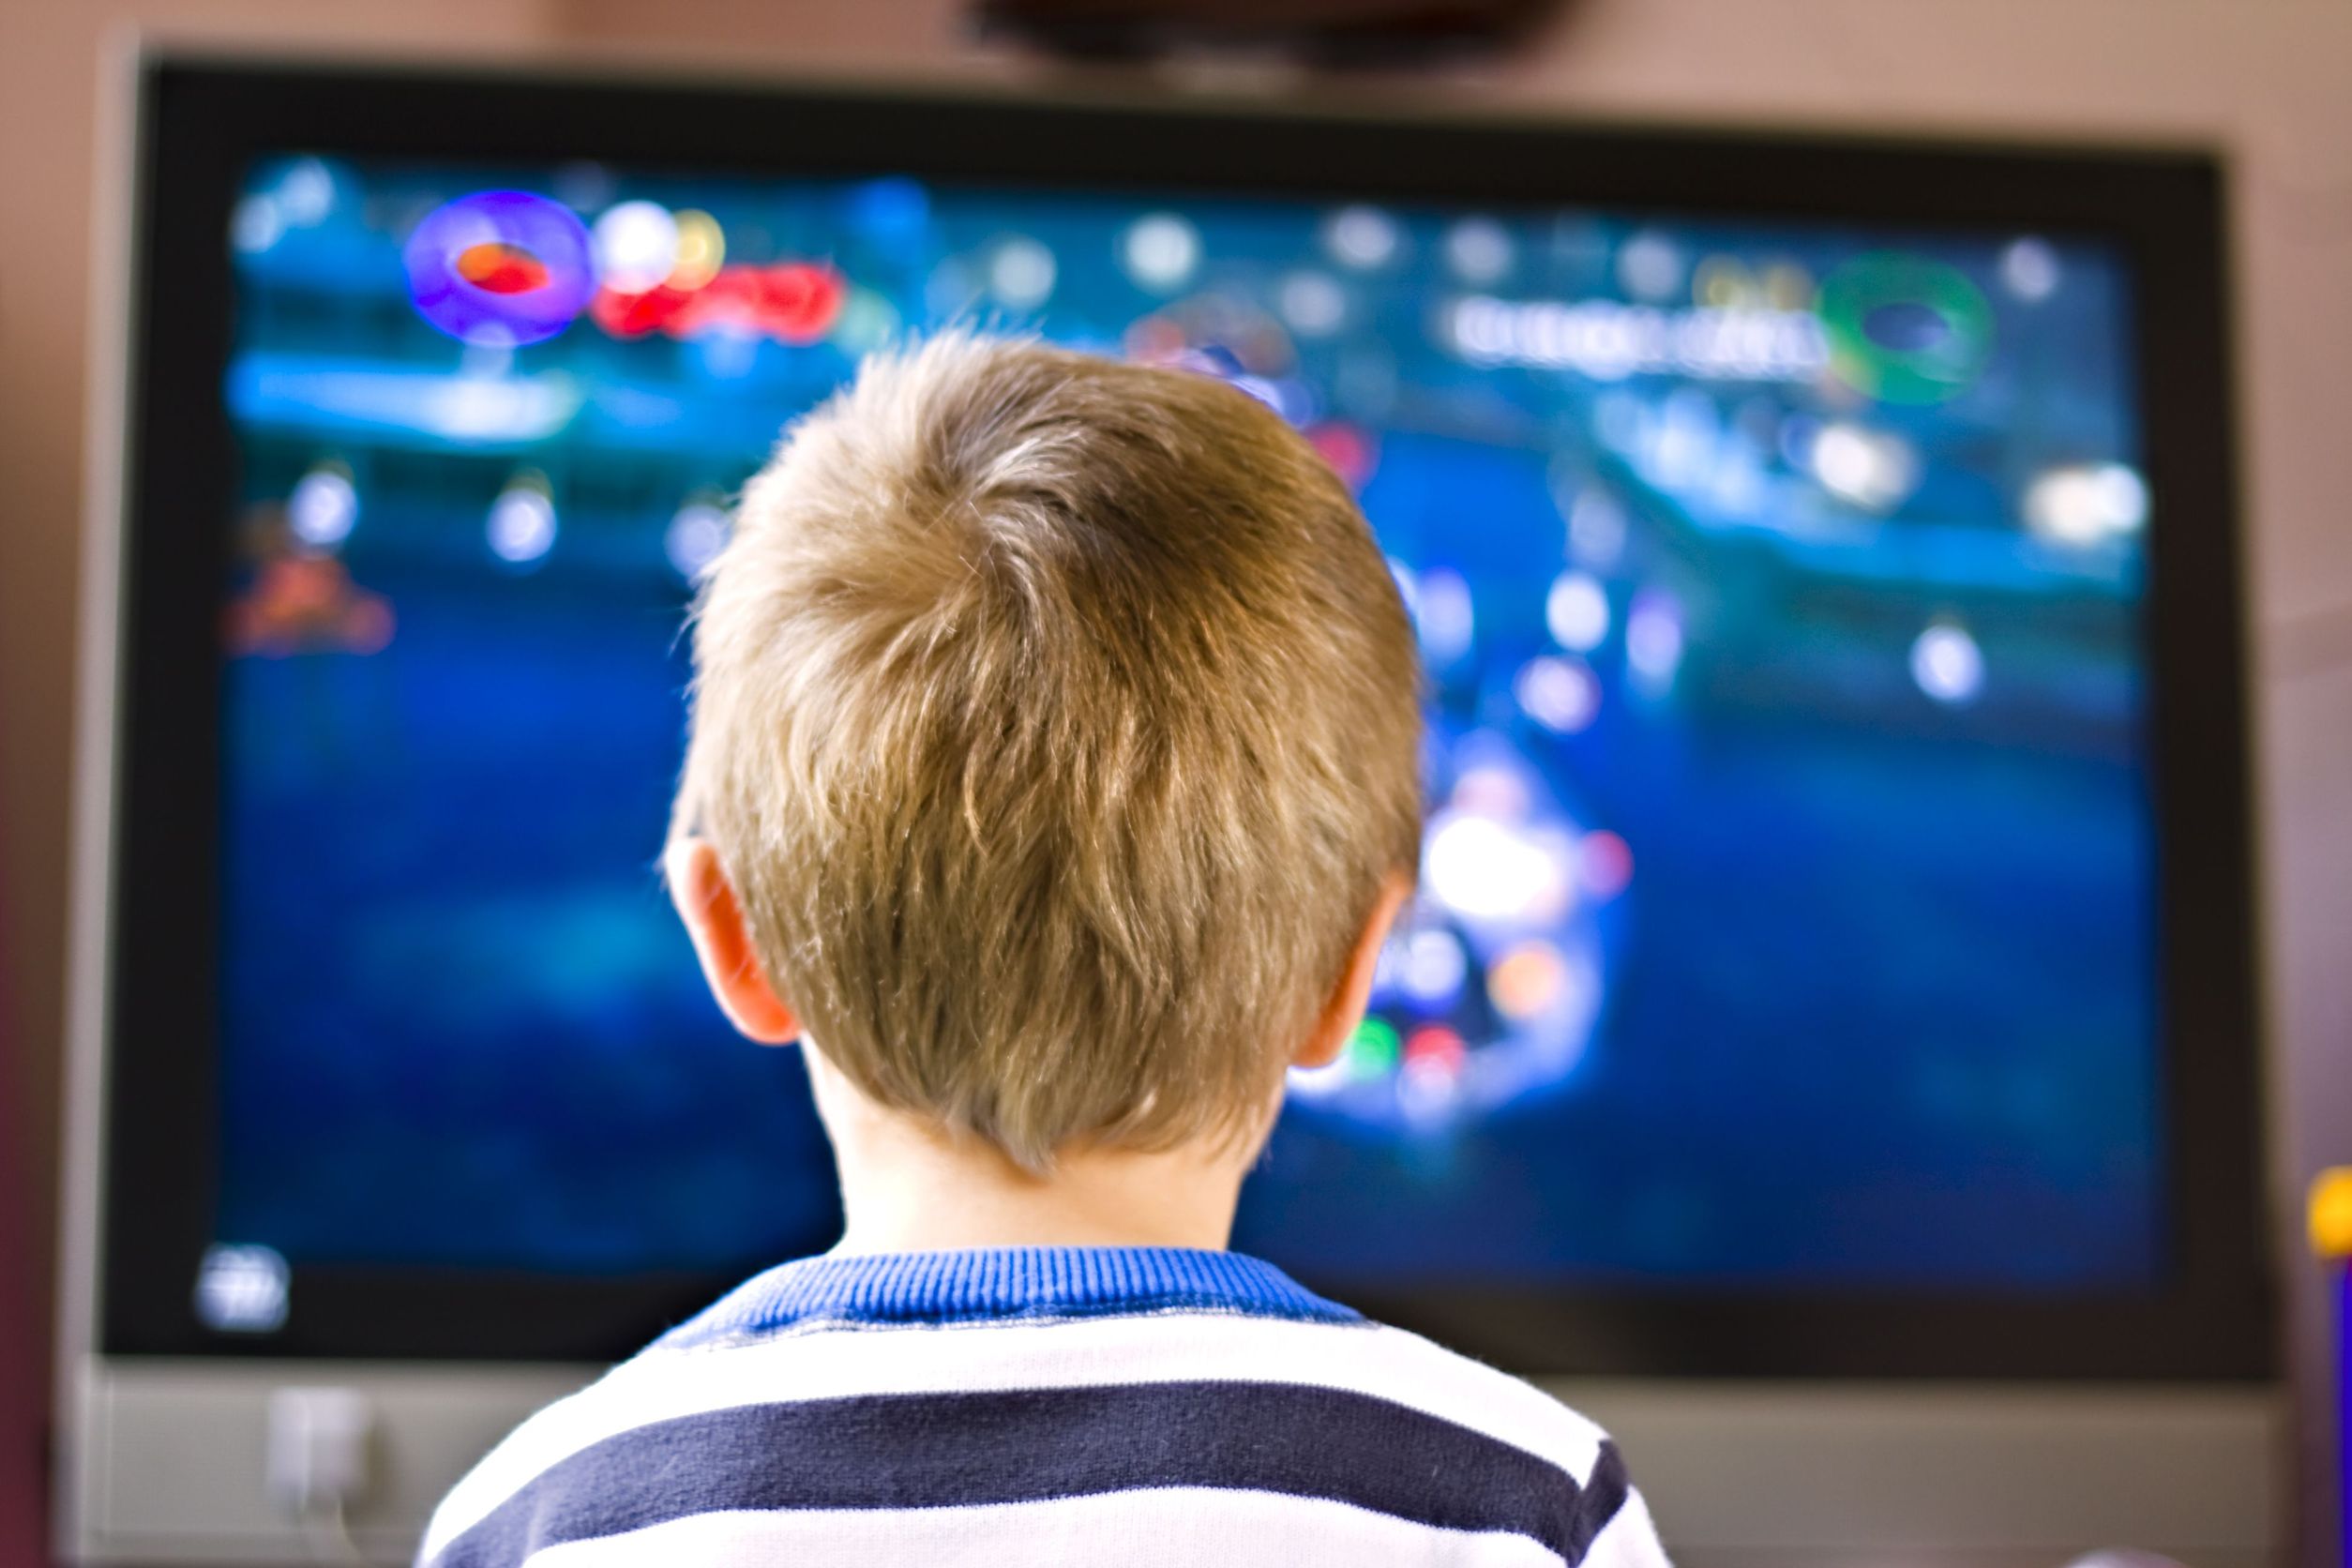 Psychological Effects of Video Games on Children